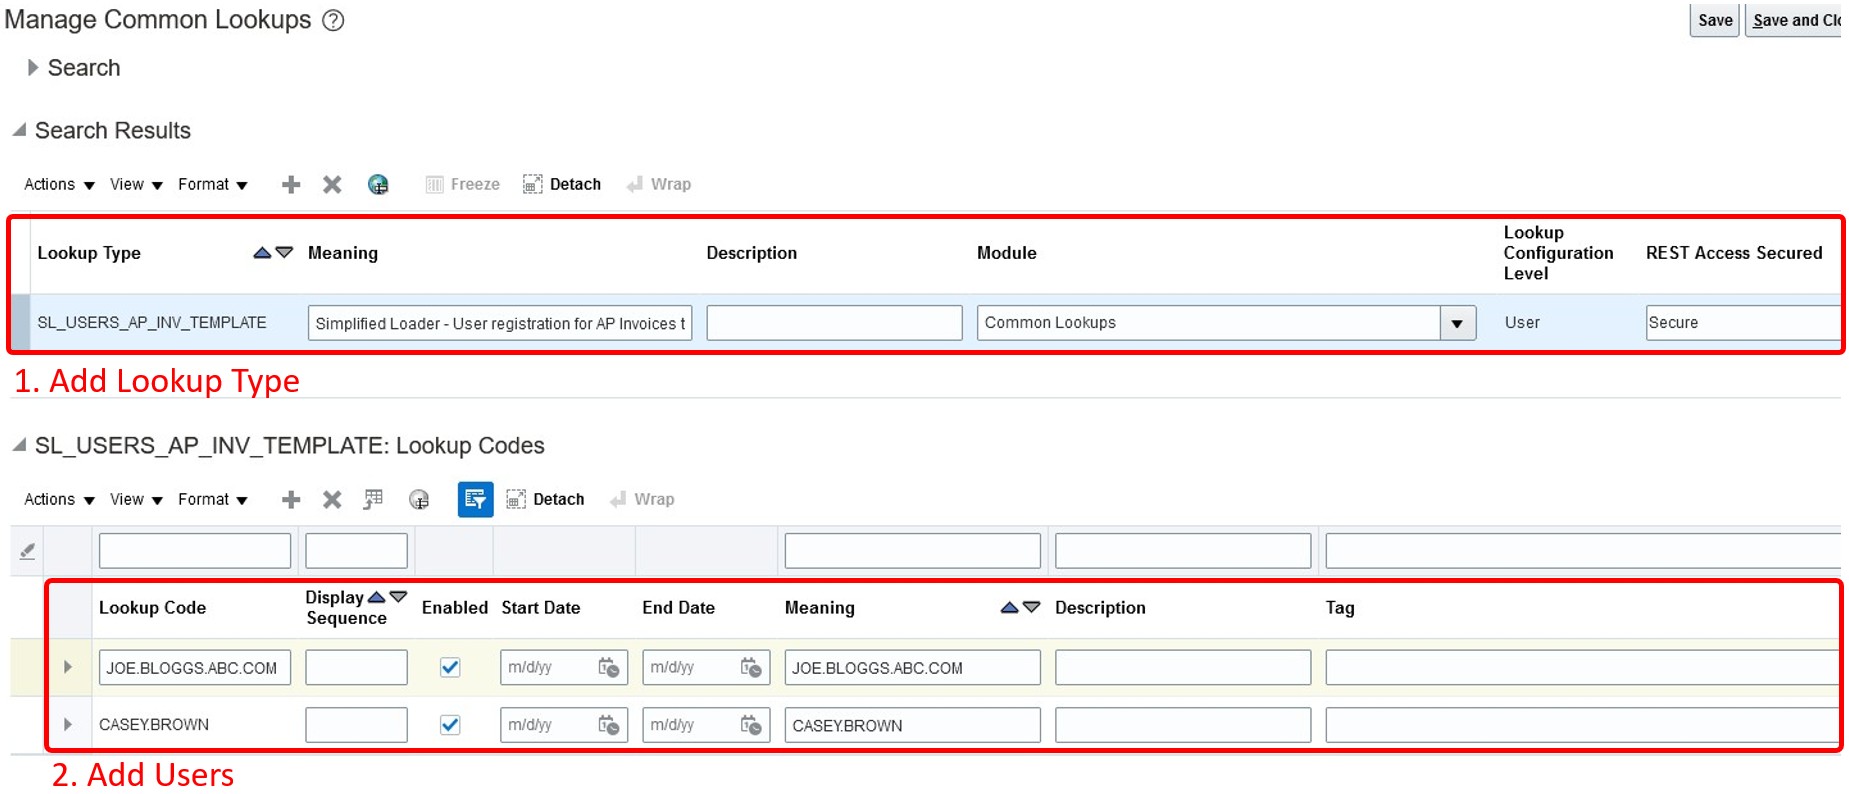 Lookup Saved - Simplified Loader Excel for Oracle Fusion Cloud ERP